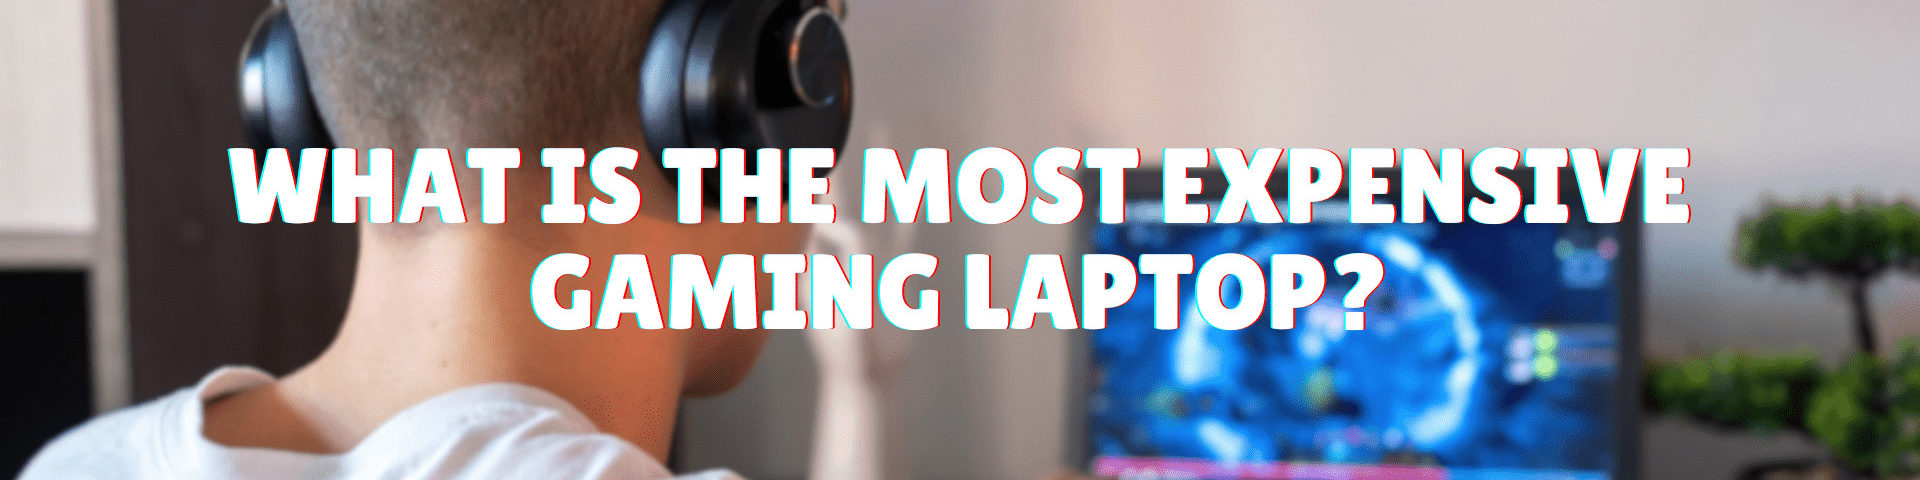 what is the most expensive gaming laptop